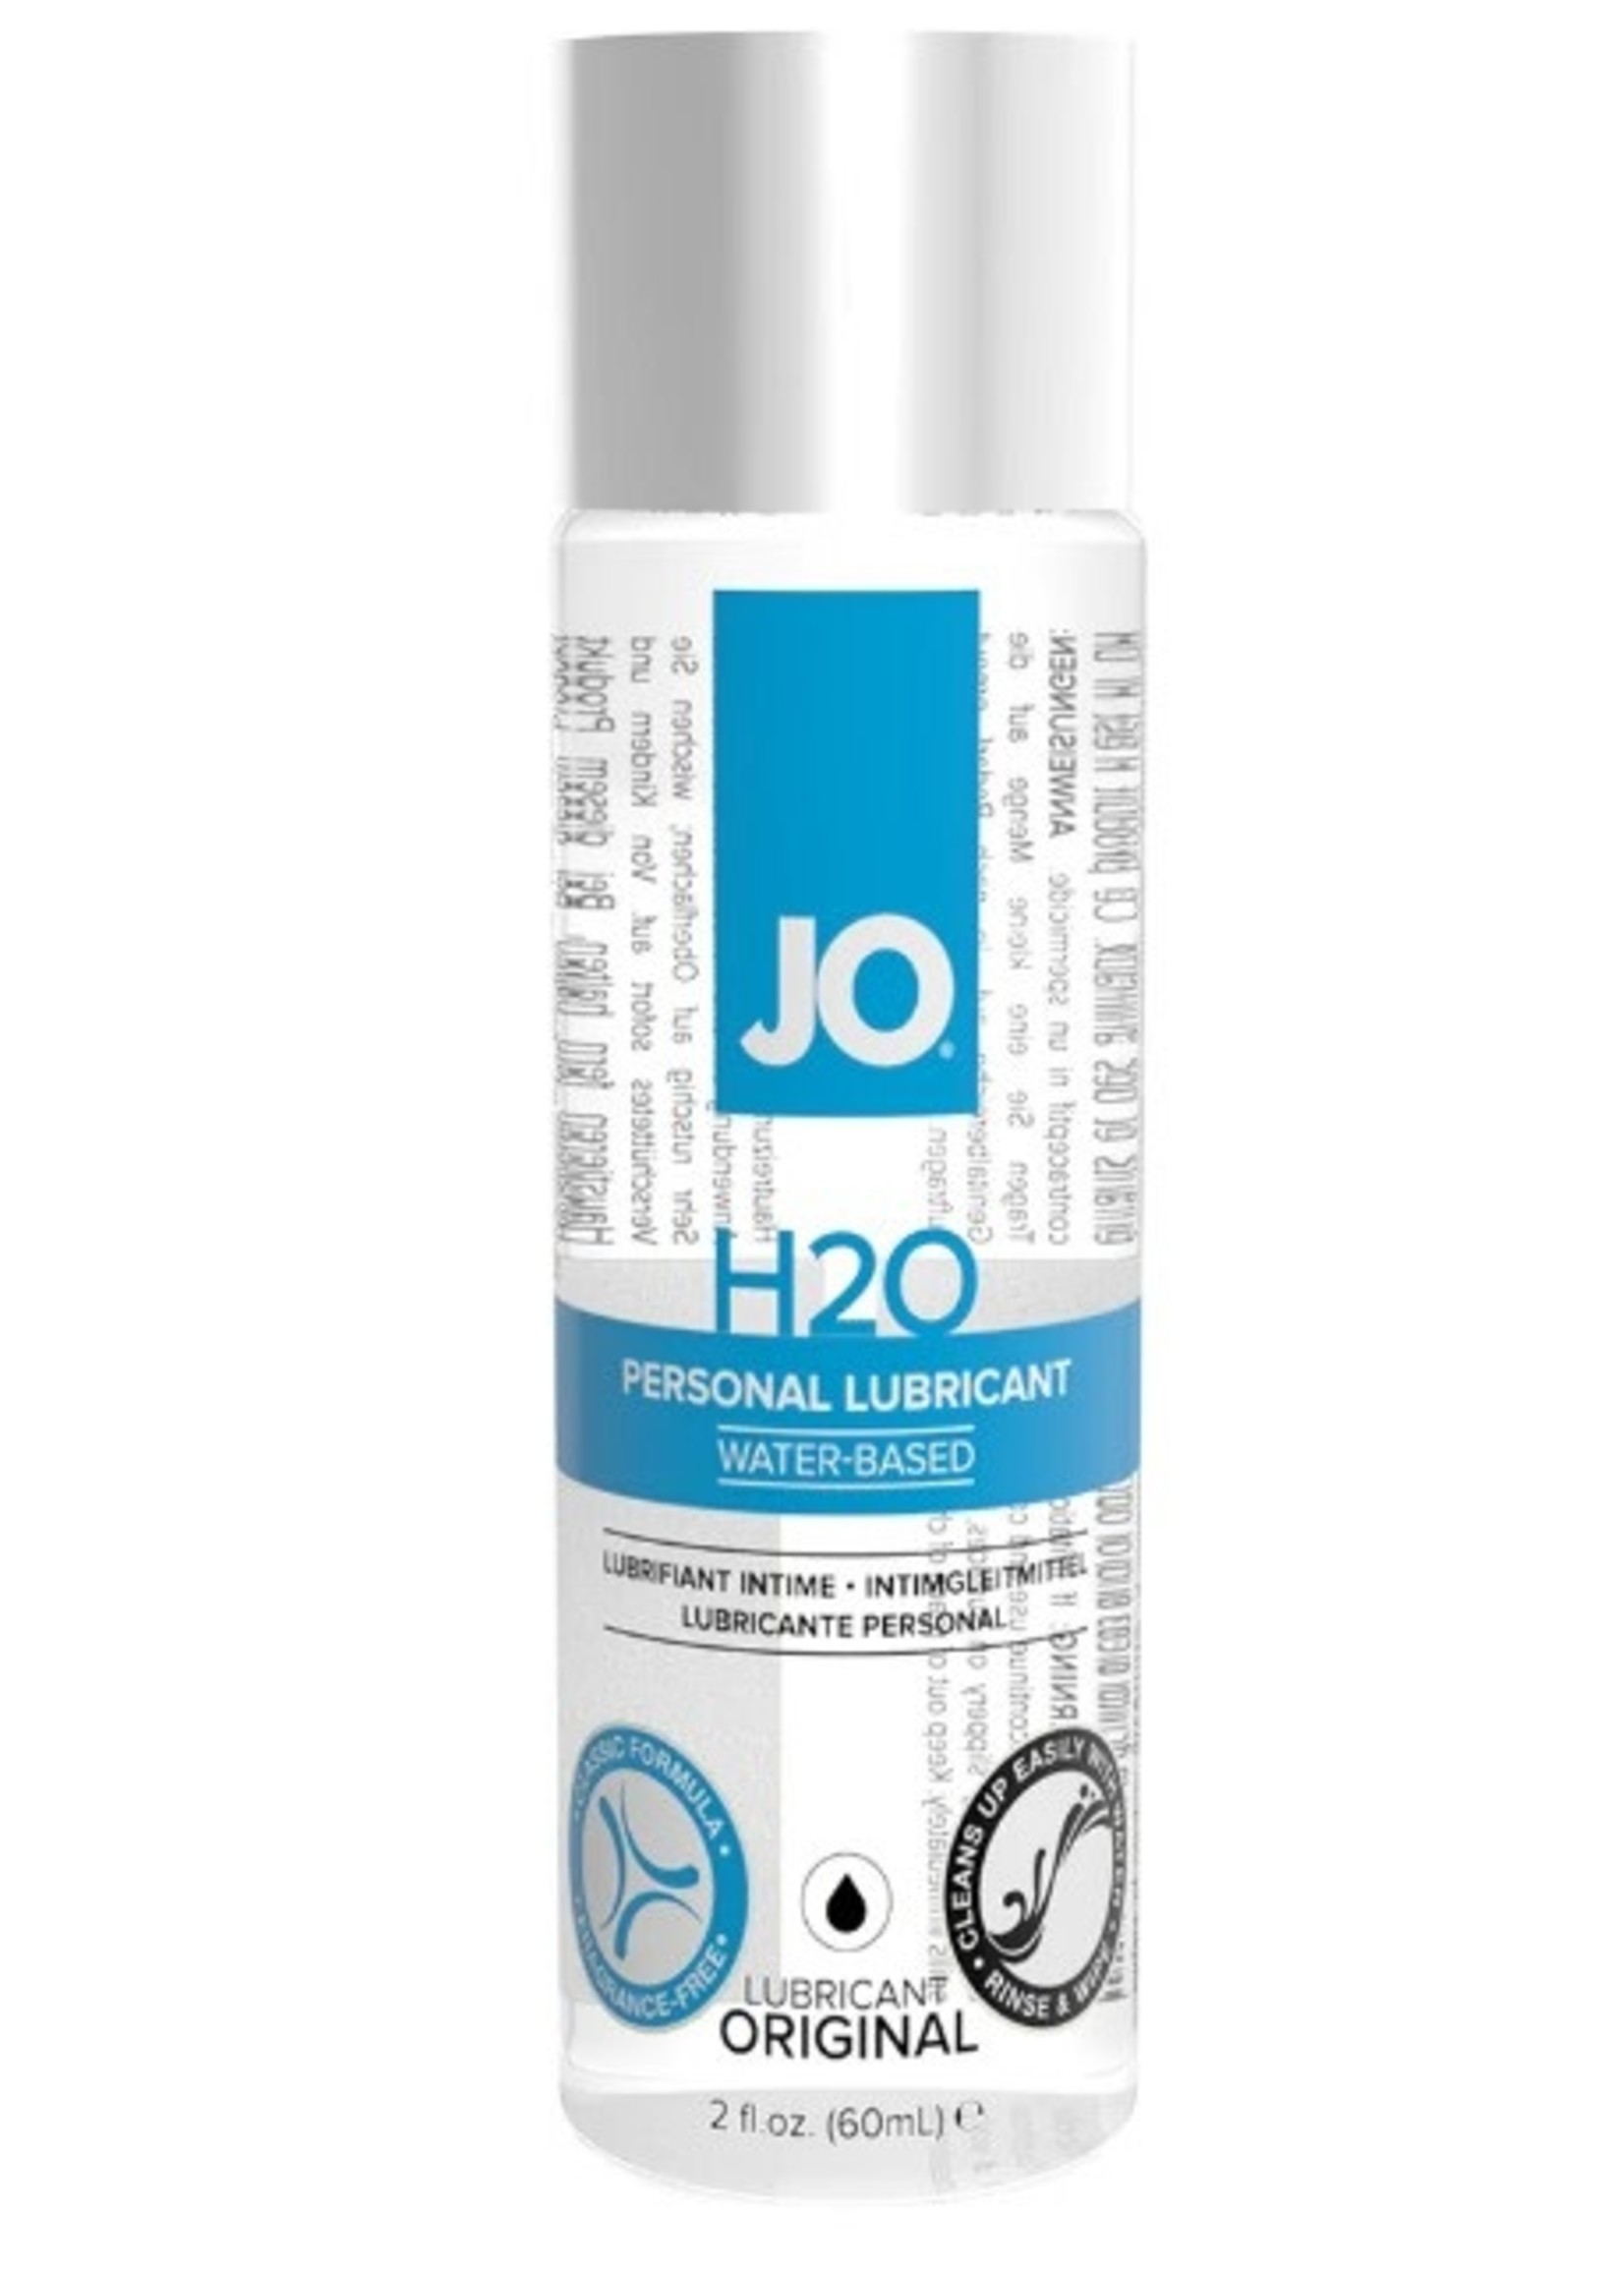 JO H2o Water Based Personal Lubricant in 2oz/60ml